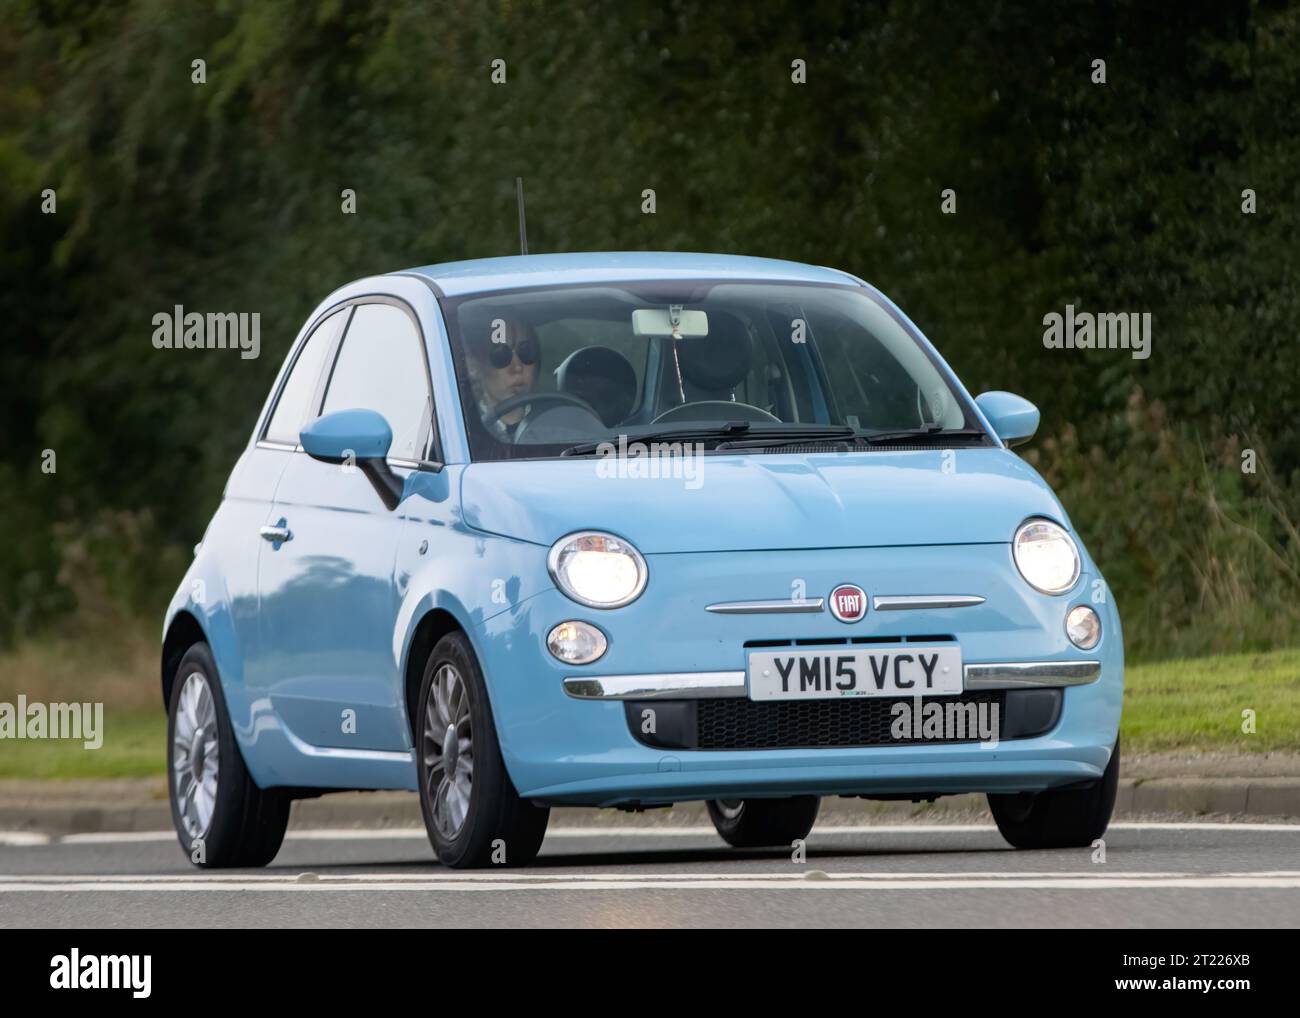 Bicester,Oxon.,UK - Oct 8th 2023: 2015 blue Fiat 500  classic car driving on an English country road. Stock Photo